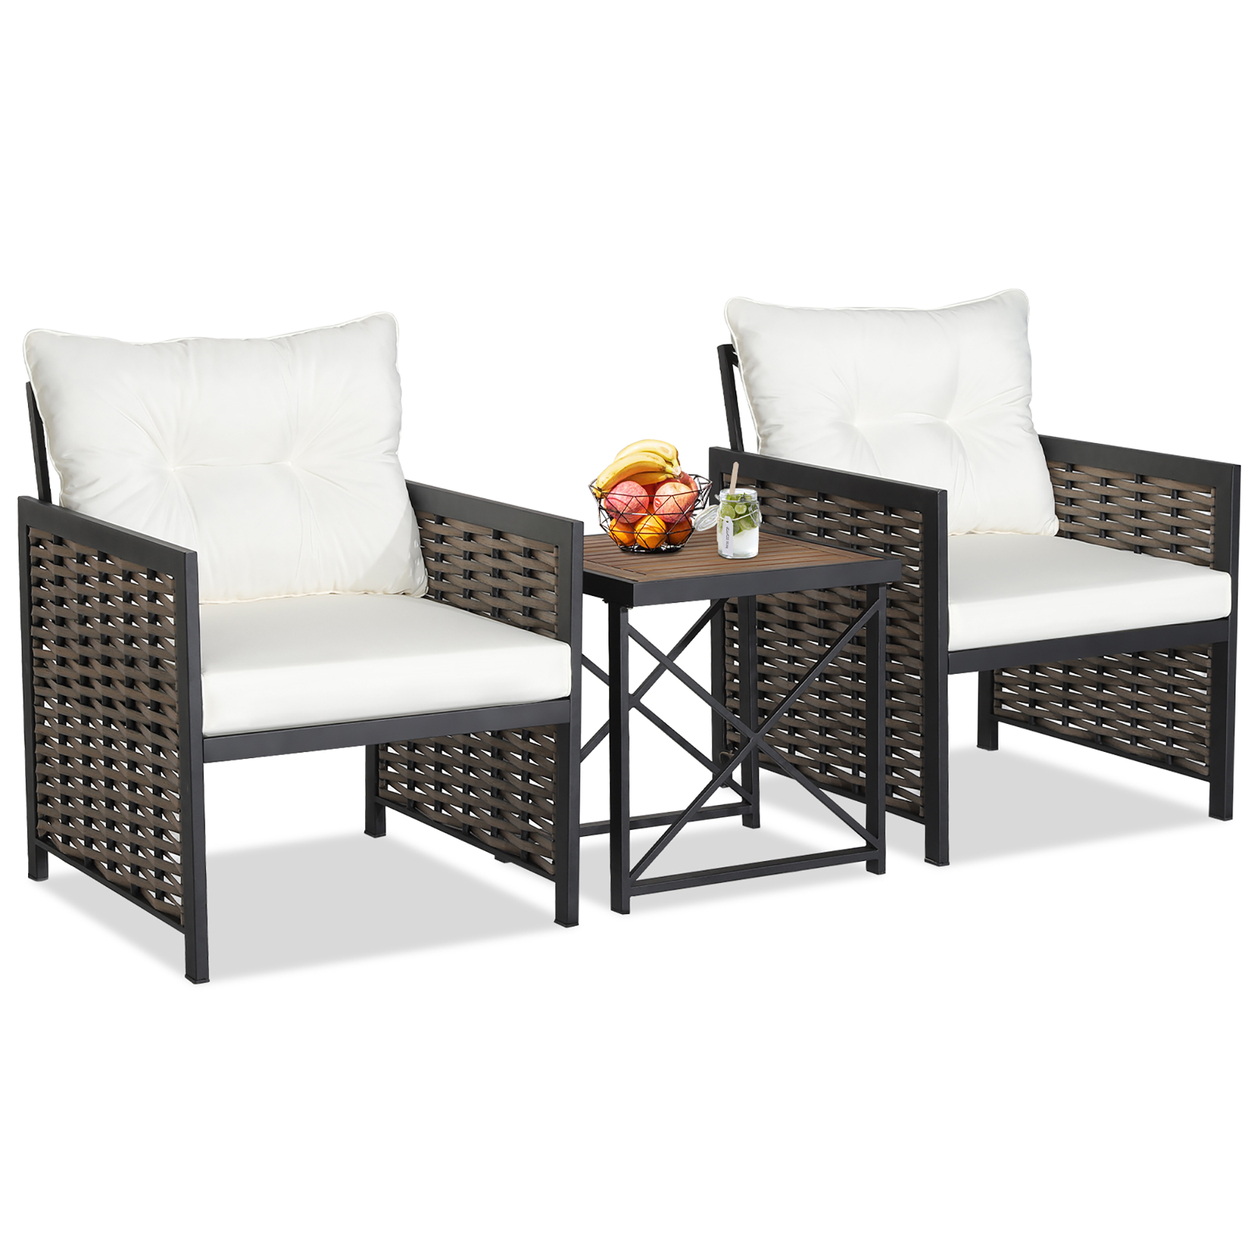 Outdoor 3 Pieces Patio Rattan Chair & Coffee Table Set Furniture Set Backyard Poolside